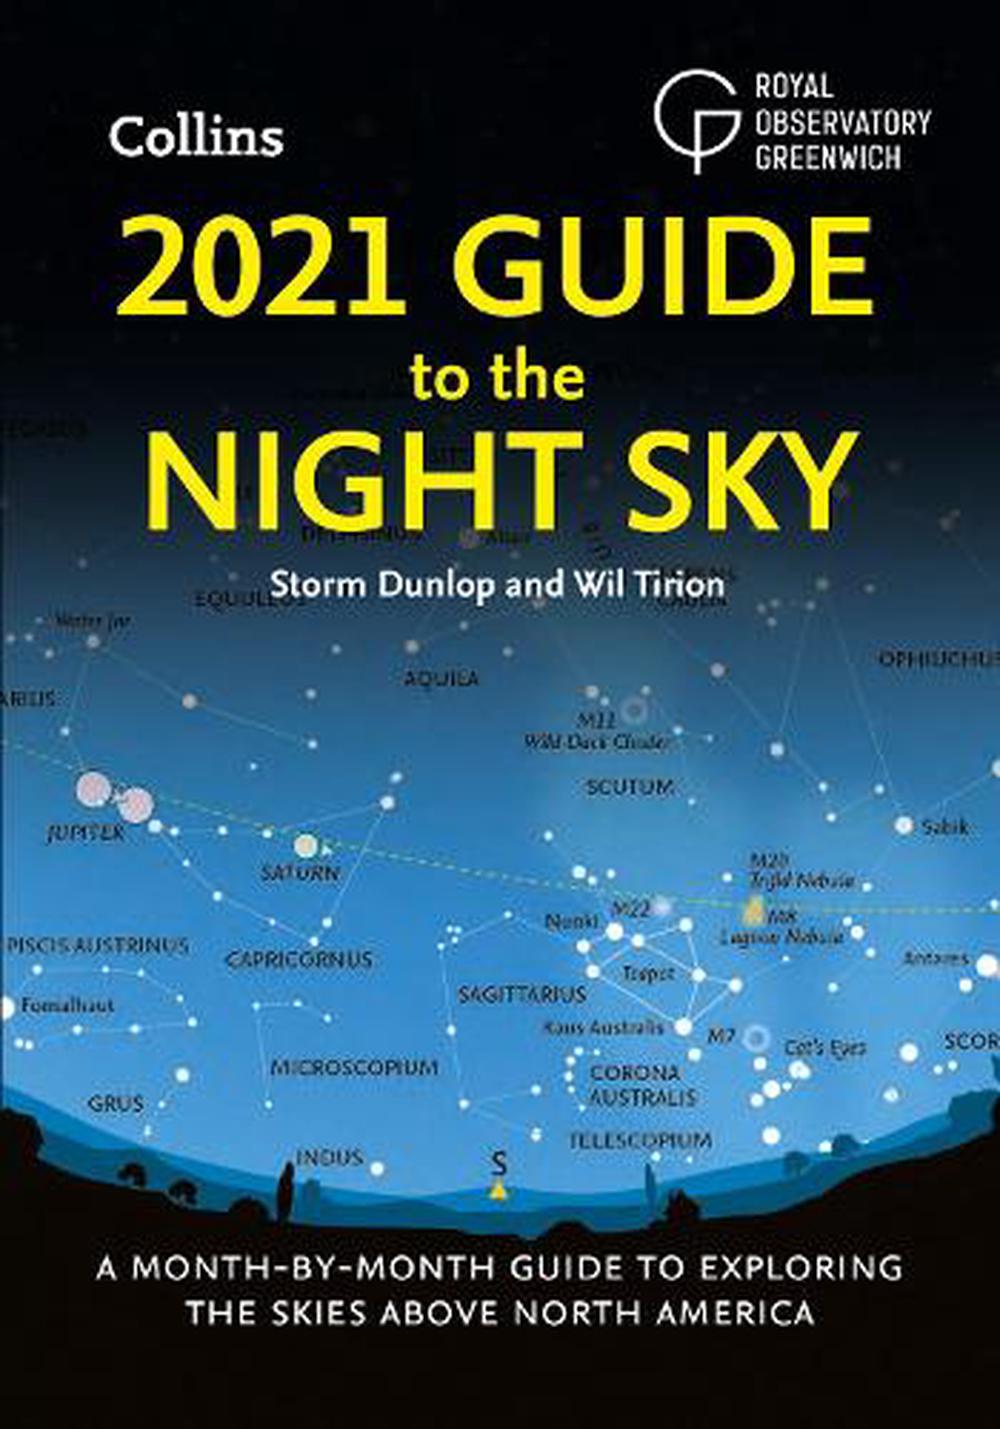 2021 Guide to the Night Sky by Storm Dunlop, Paperback, 9780008399771 Buy online at The Nile